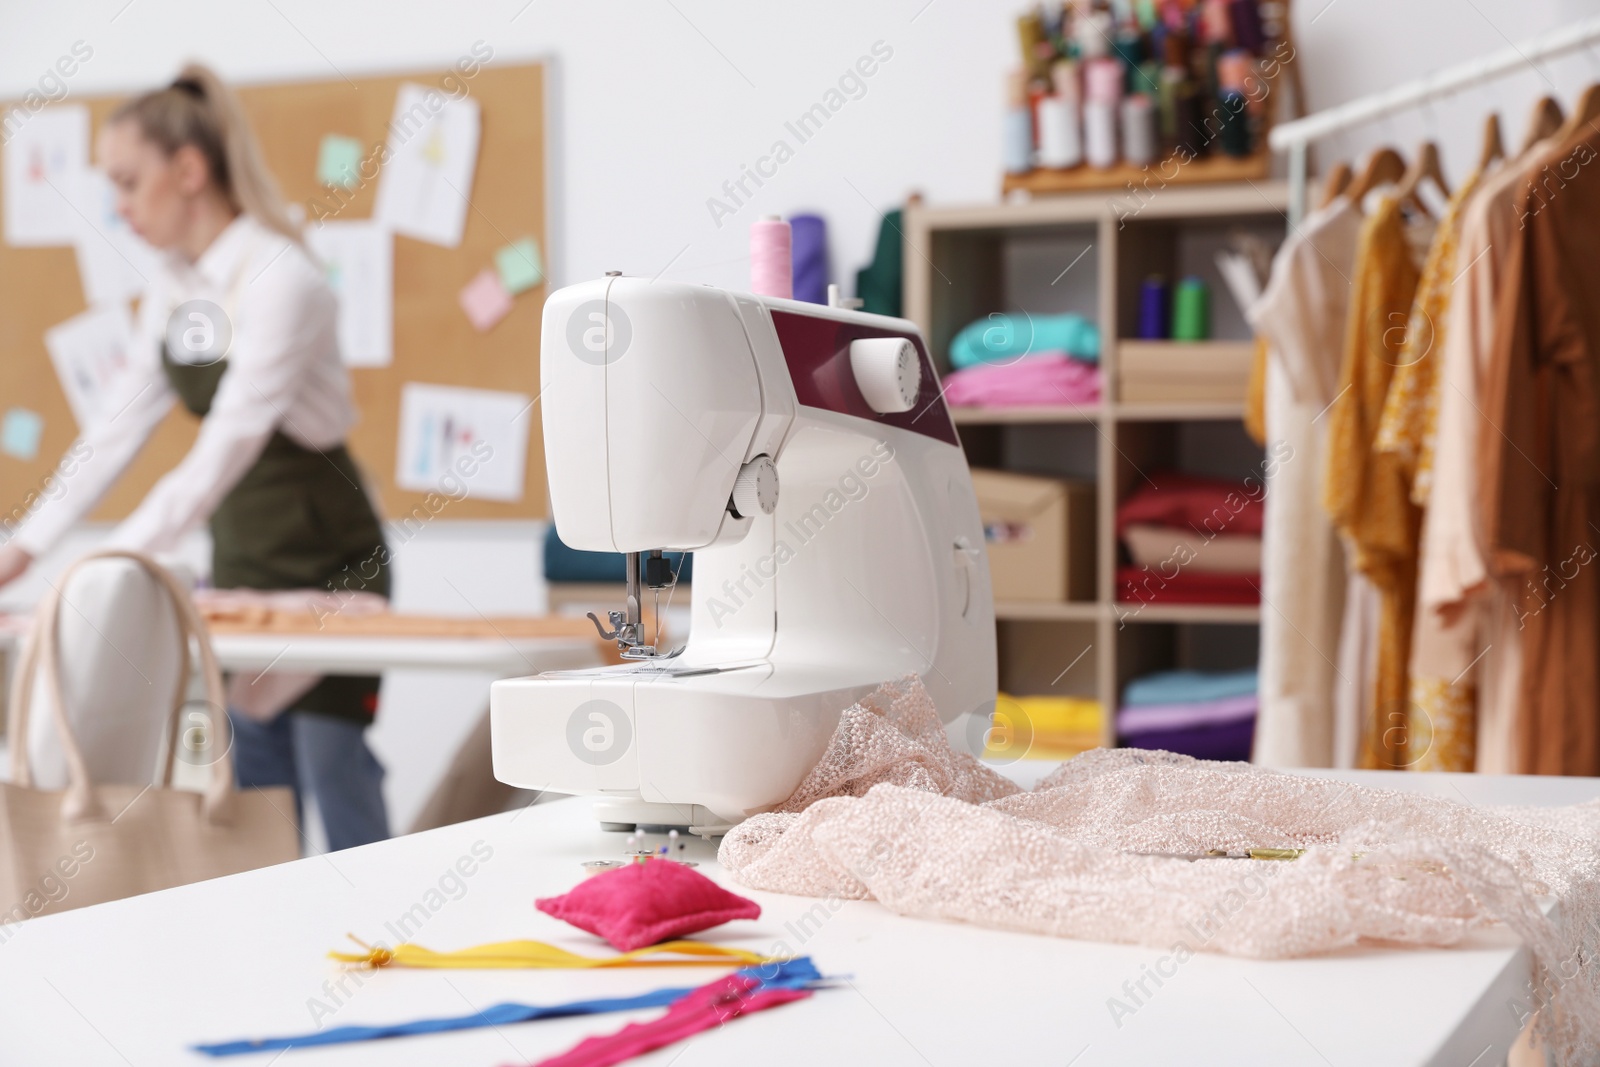 Photo of Dressmaker working in atelier, focus on table with sewing machine and accessories